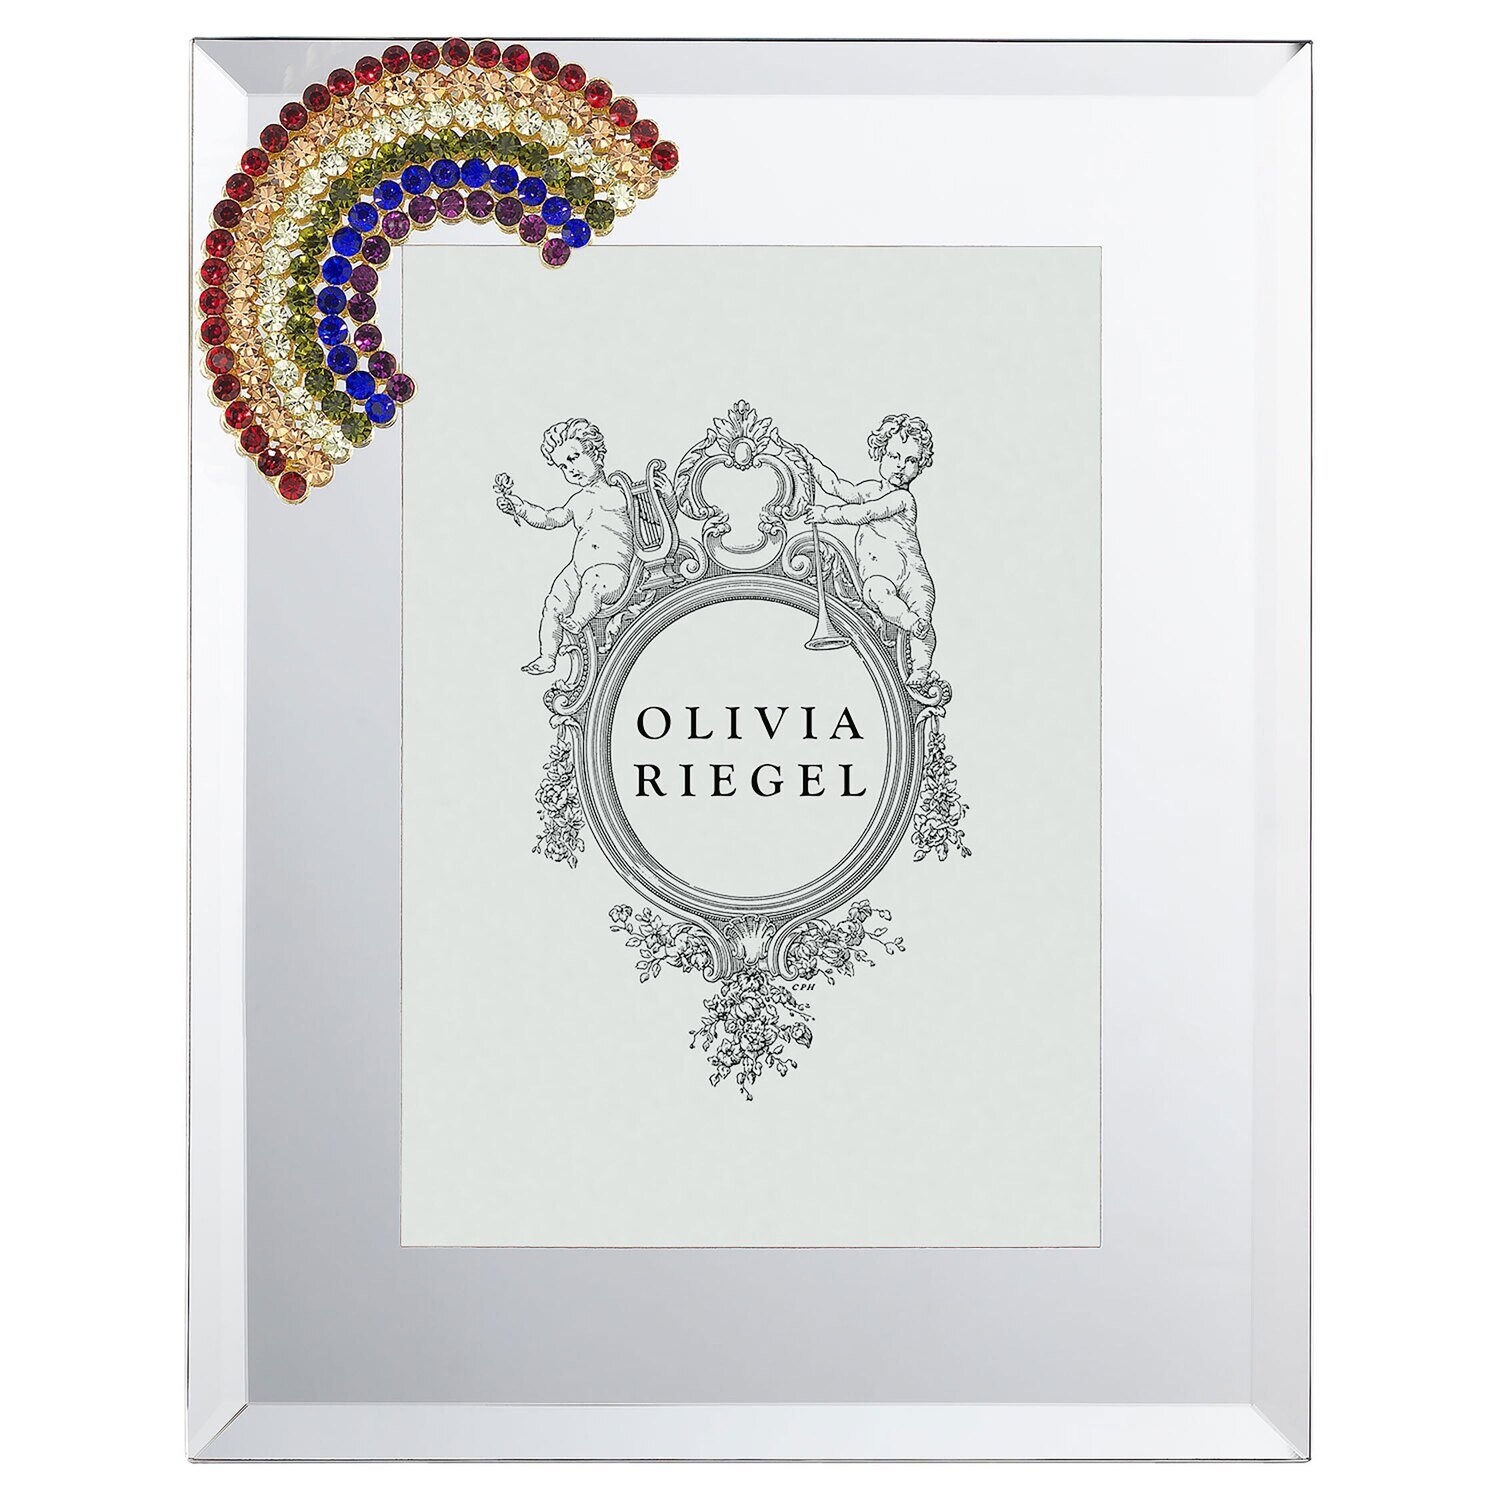 Olivia Riegel Rainbow 5 x 7 Inch Picture Frame RT4209